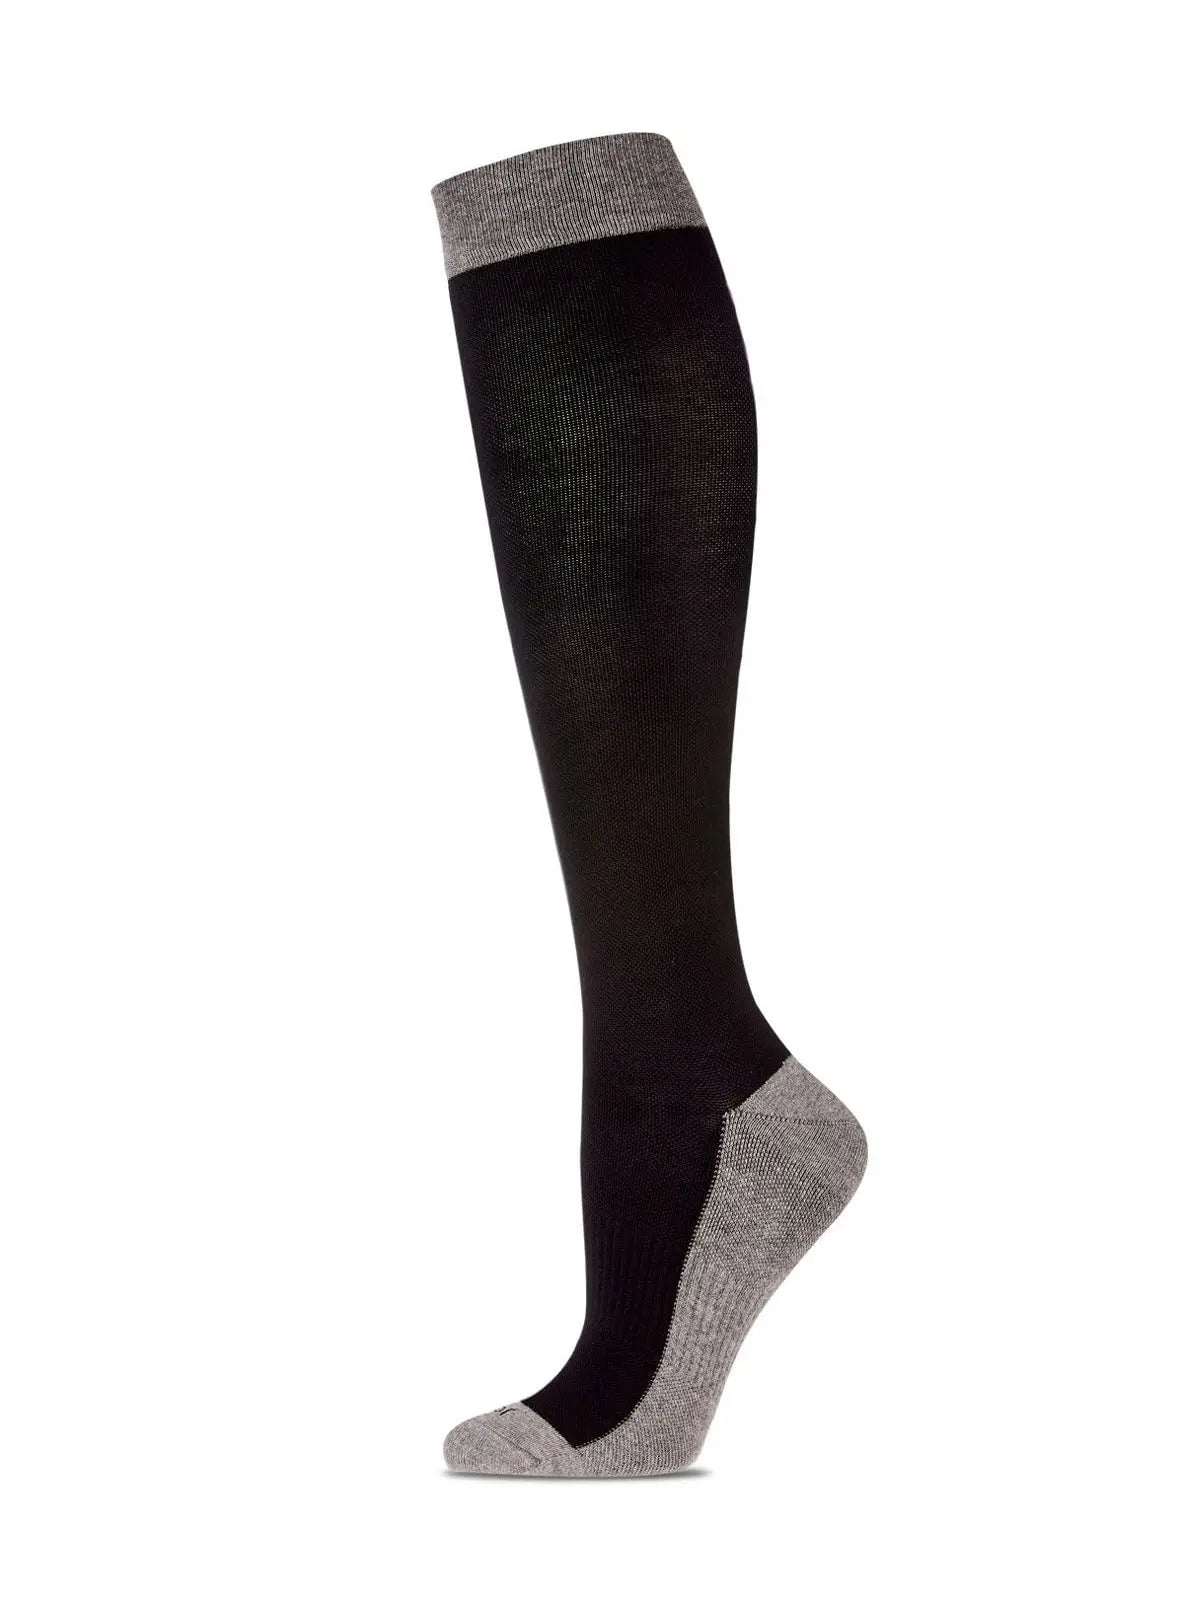 Two Tone Women's Bamboo Compression Socks